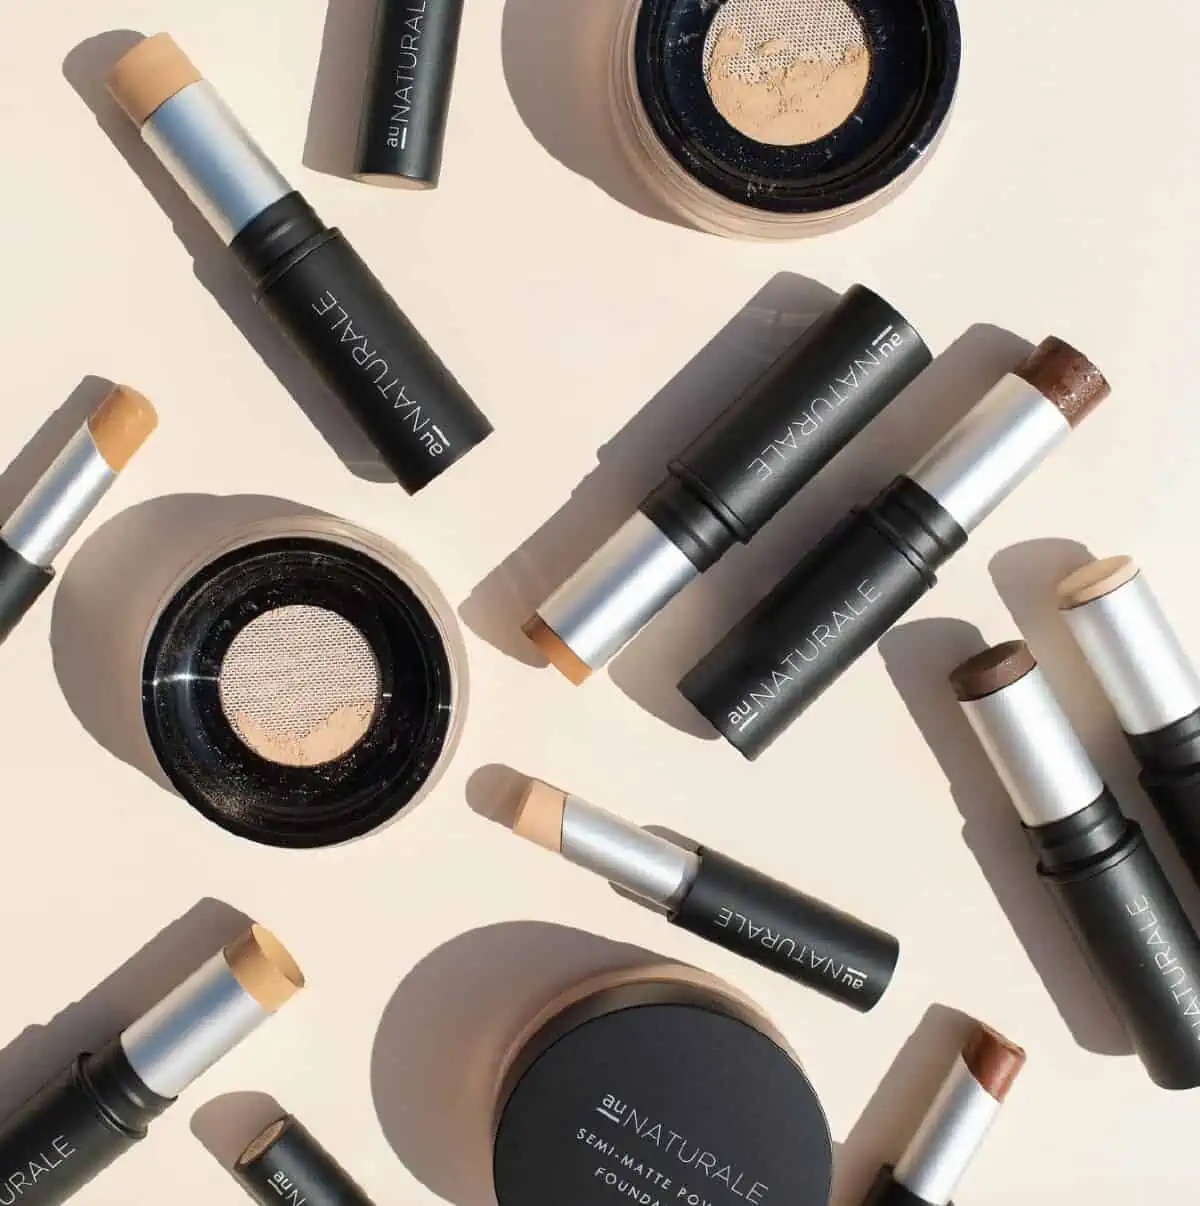 An assortment of Au Naturale vegan makeup products scattered on a light peach background, including their stick foundation and concealer.